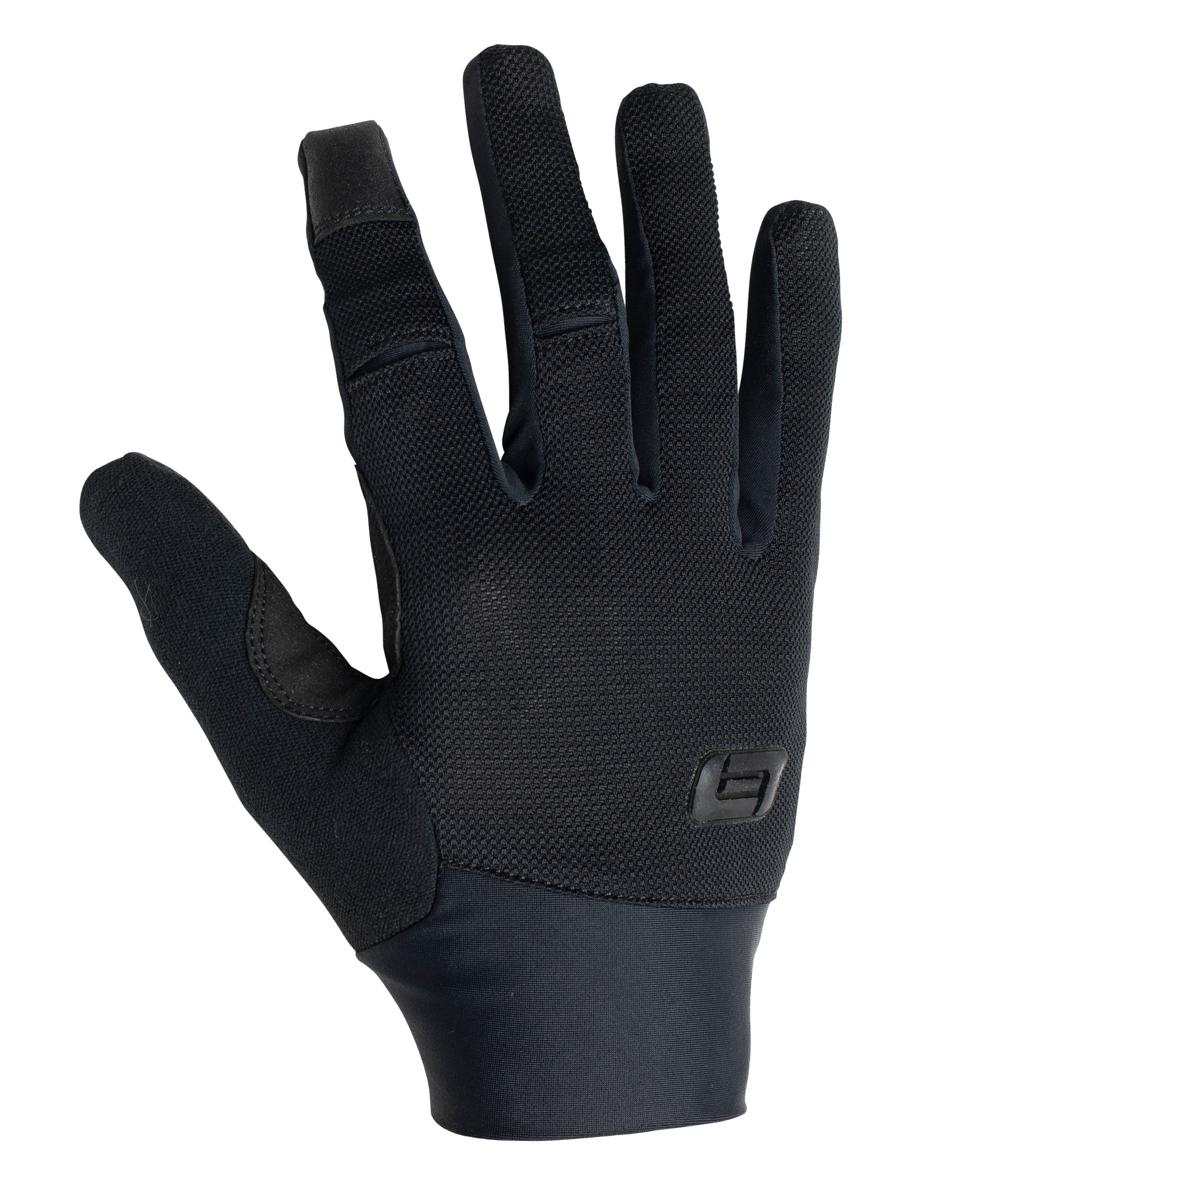 Bellwether Overland Men's Cycling Gloves